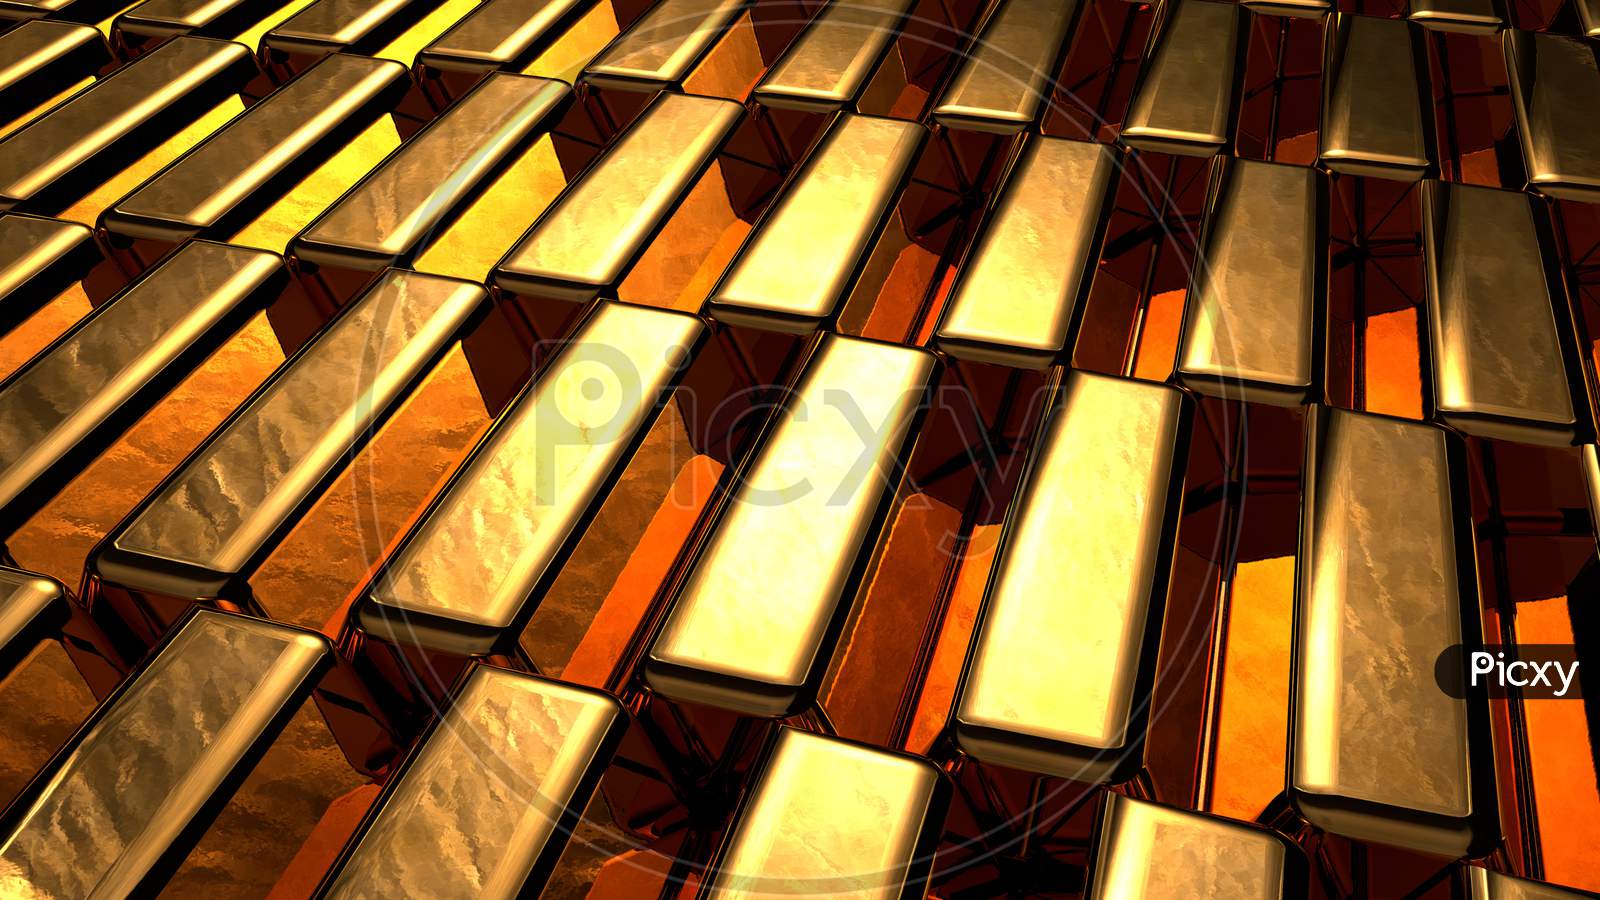 Group Of Many Shiny Gold Bar Arrangement In A Row. Business Gold Future And Financial Concept. 3D Illustration Rendering. World Economics And Currency Exchange. Money Trade And Safe Haven Marketplace